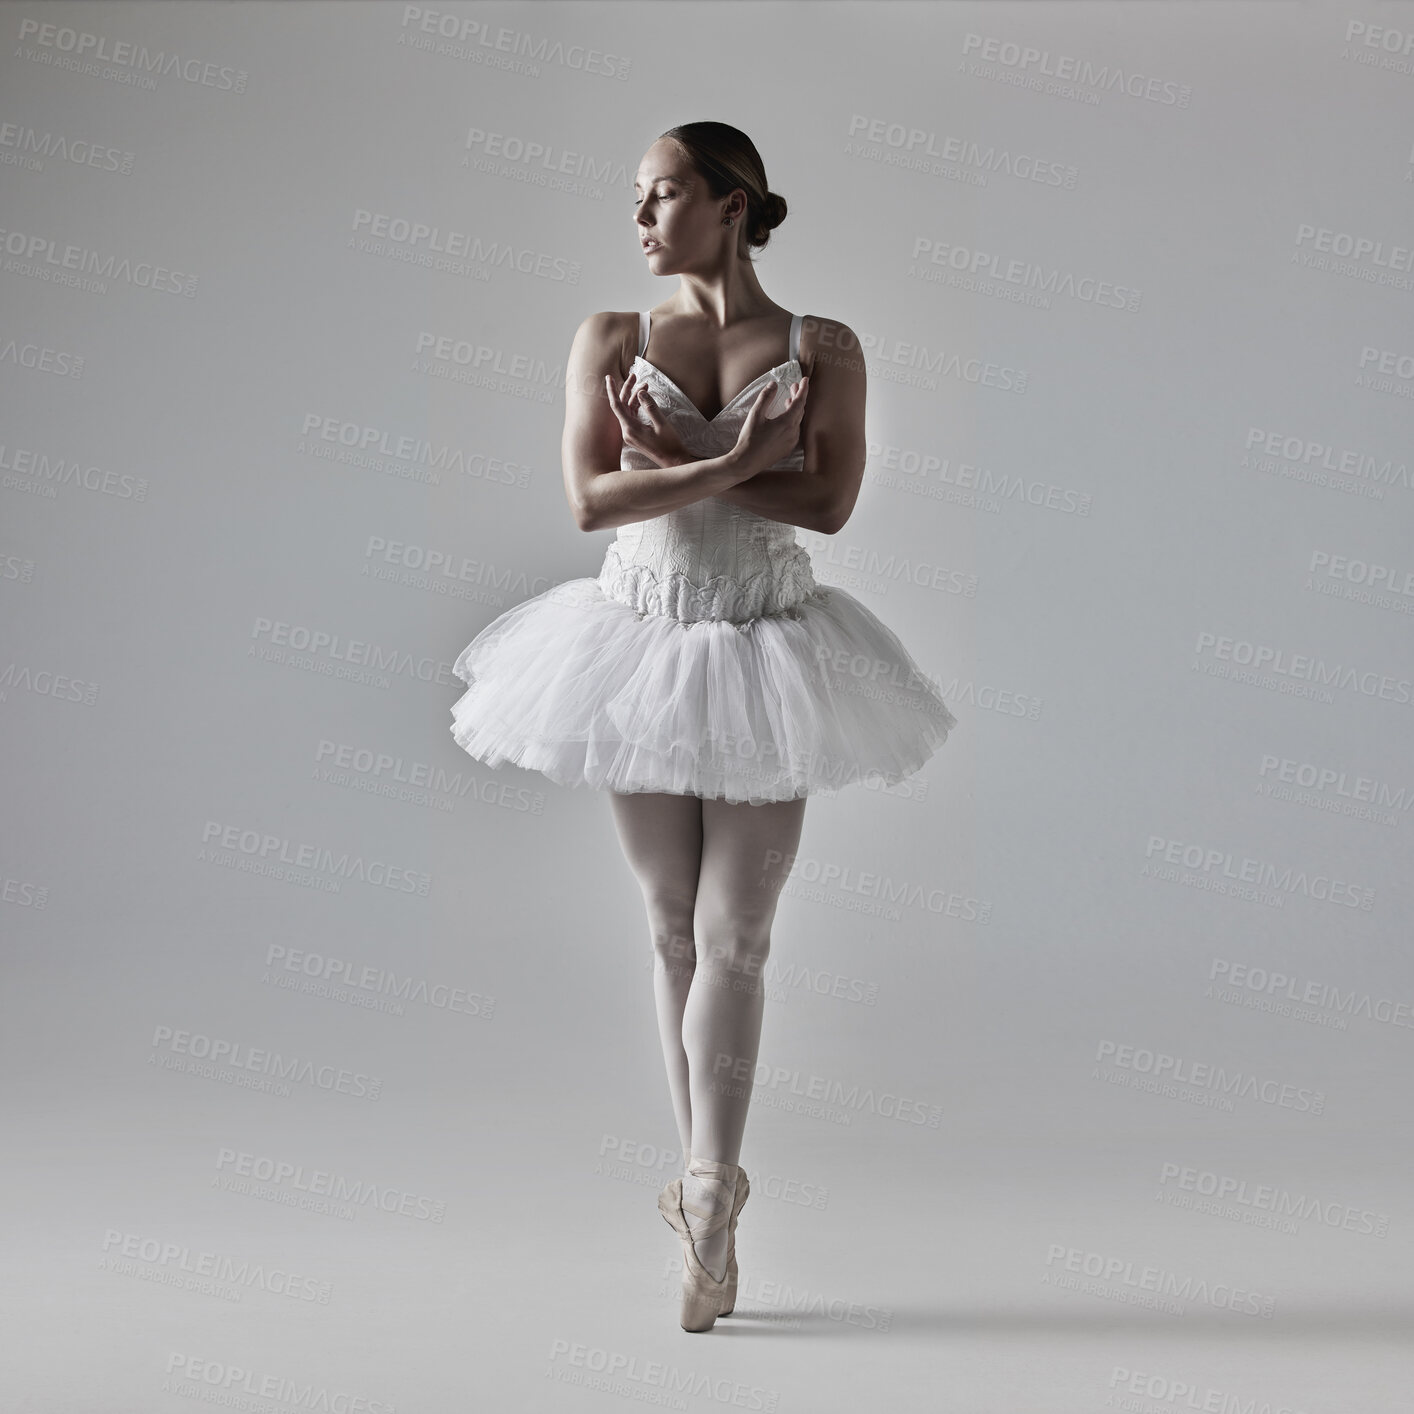 Buy stock photo Full of a beautiful young ballet dancer rehearsing in a dance studio